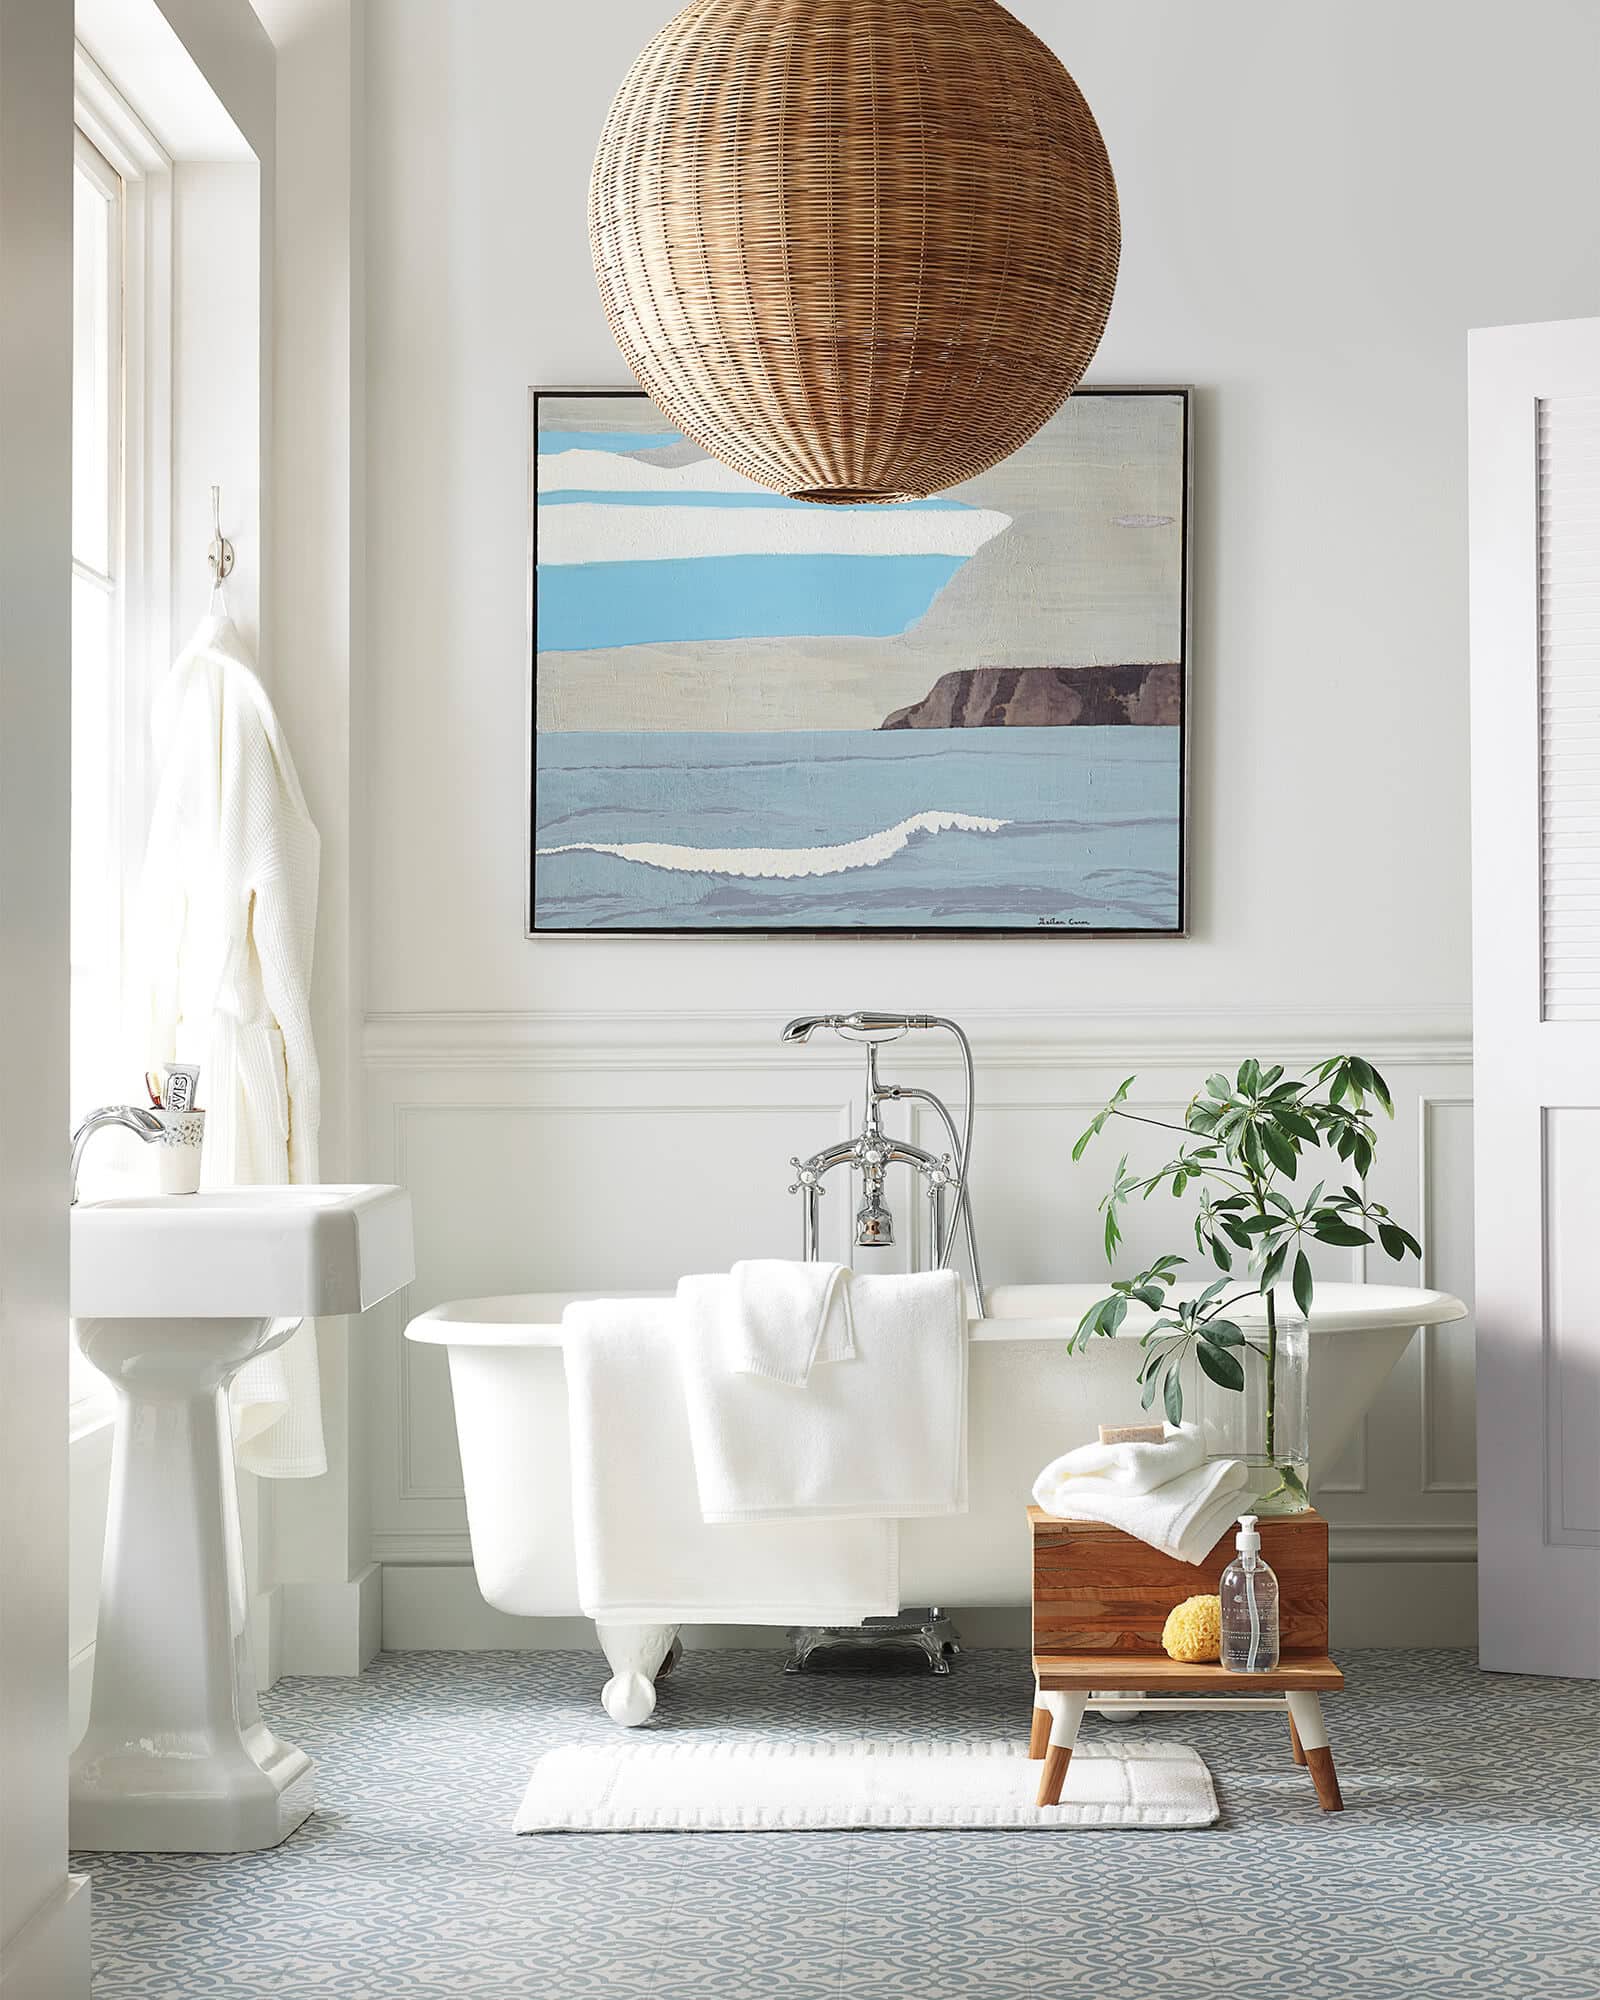 20 Best Coastal Bathroom Ideas to Use in Your Home